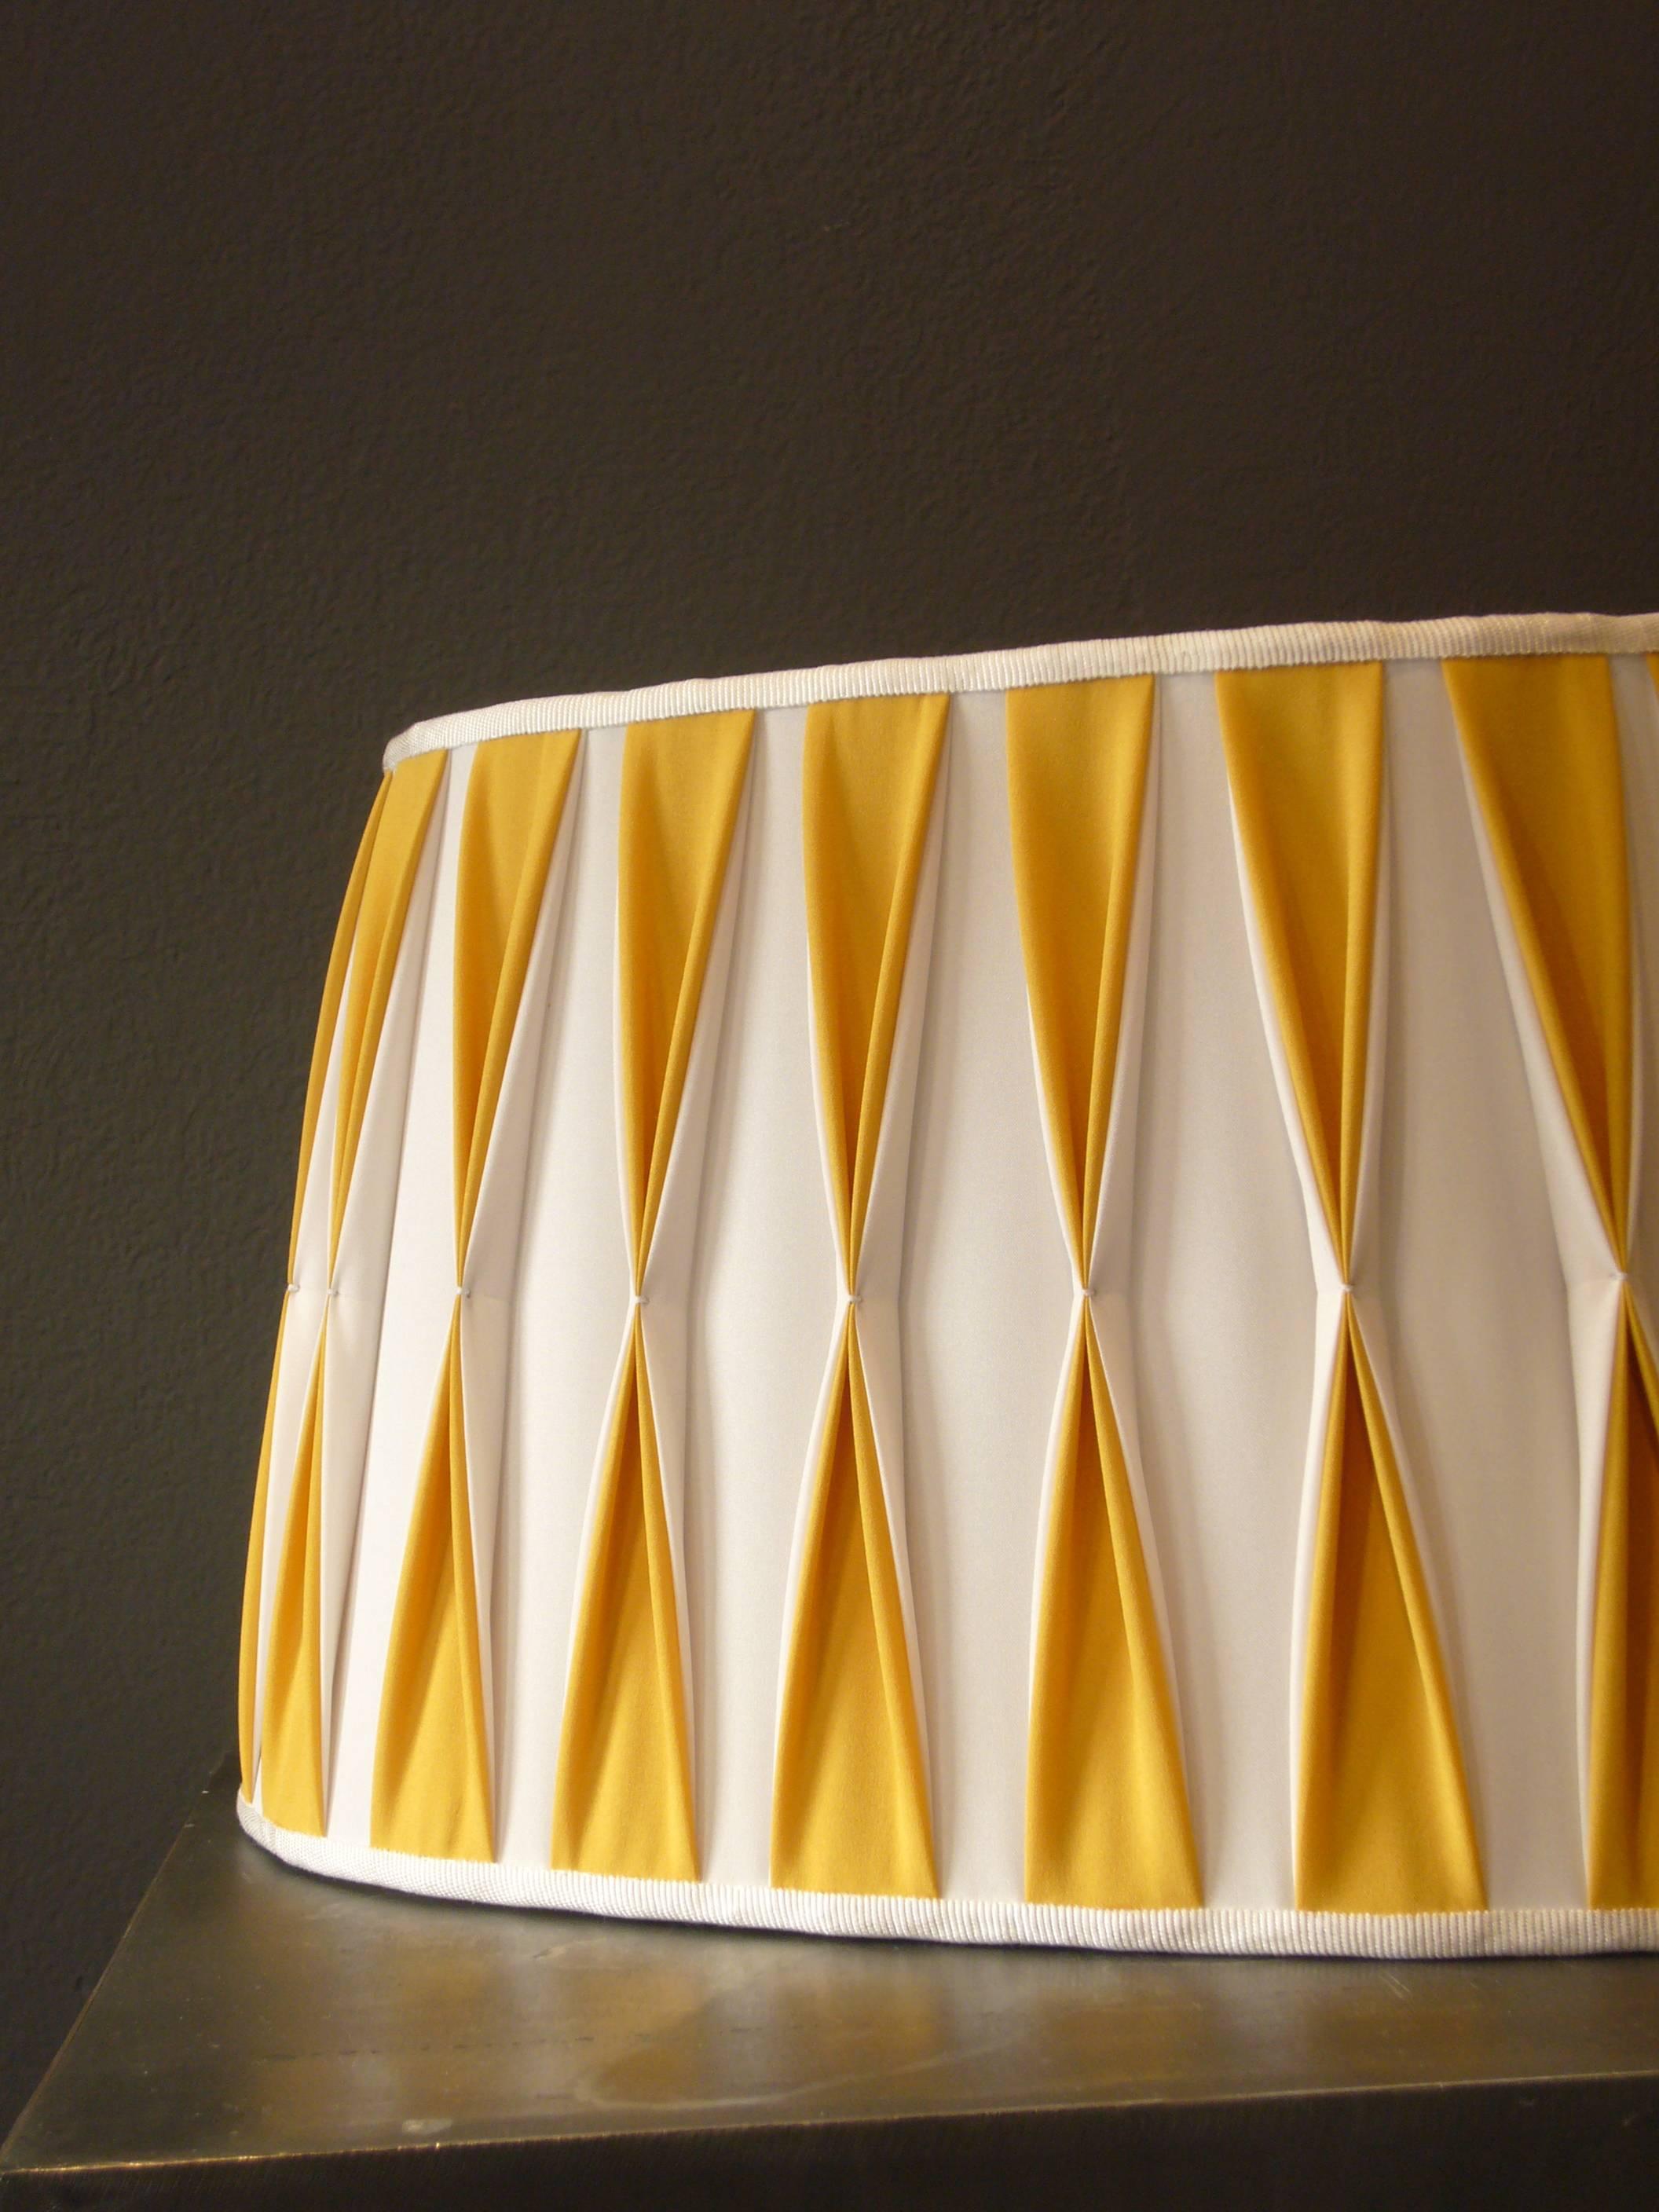 So chic wall lampshade. Handmade in Italy.
Two of these ready to ship.
We can customized for you.